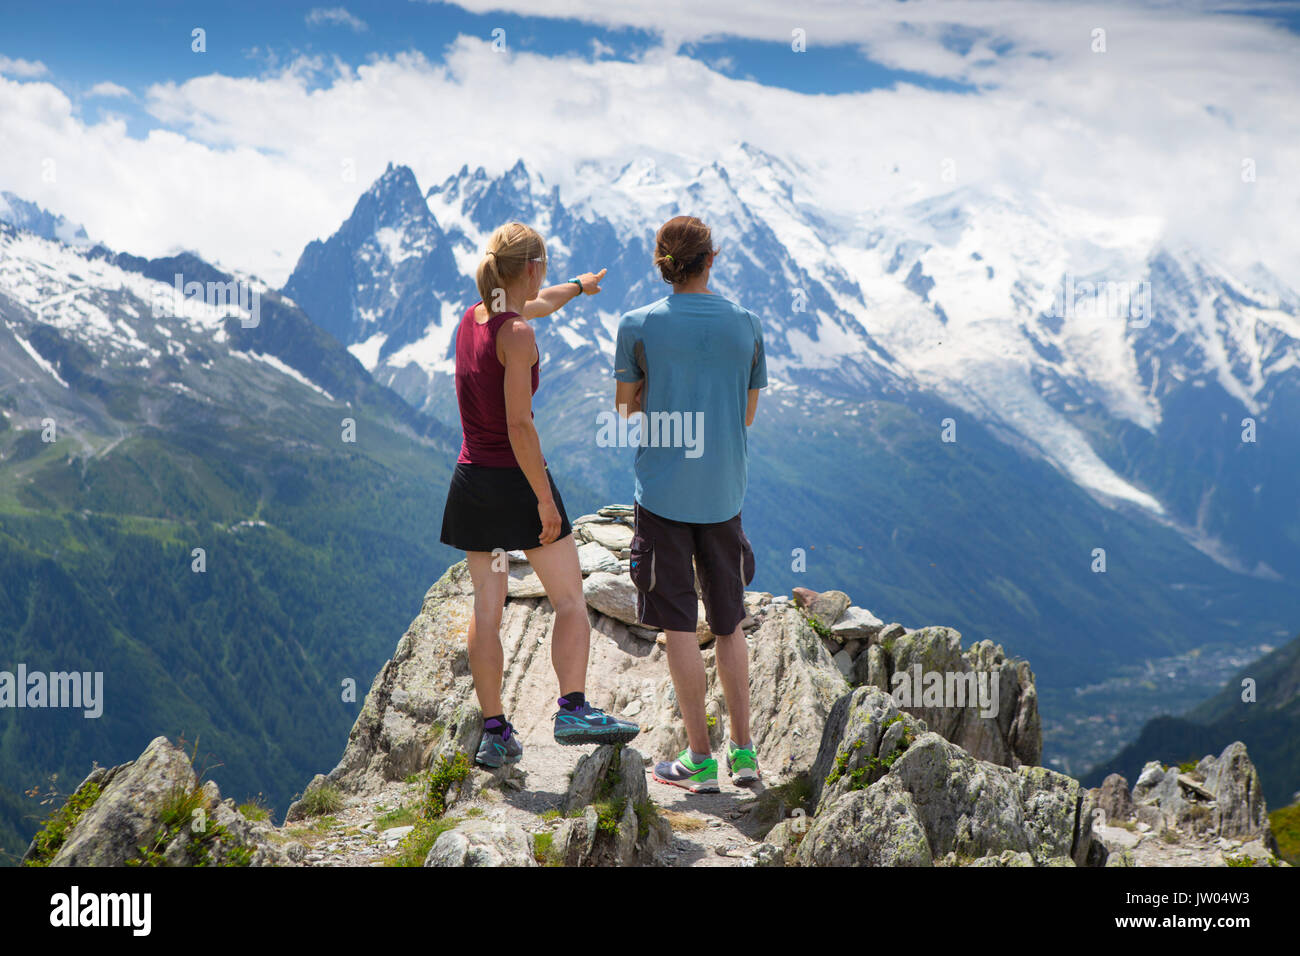 Two runners are standing on top of a mountain, overlooking the Chamonix valley and Mont Blanc range. This region in the French Alps is popular for trail running or sky running. Stock Photo